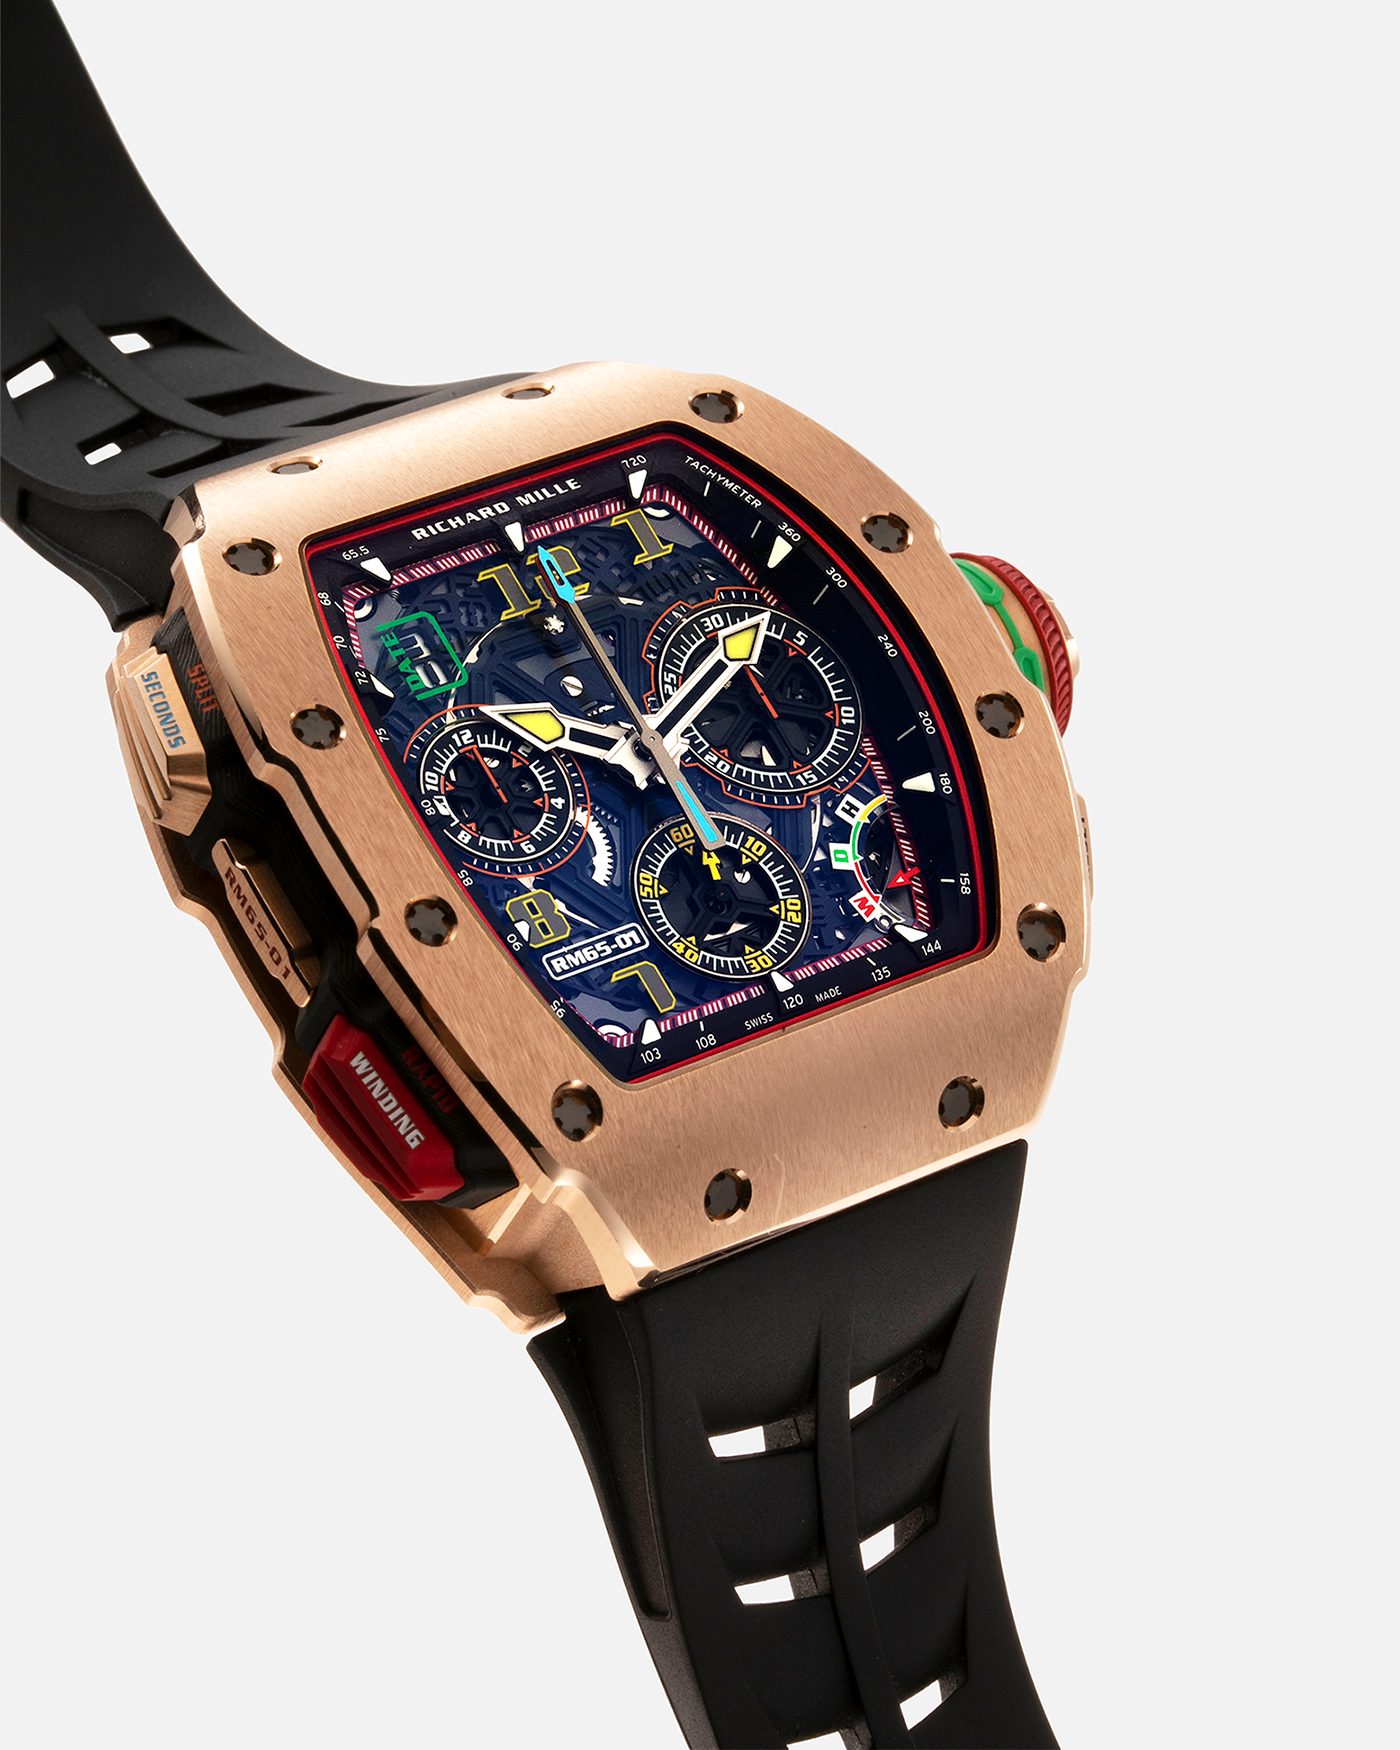 Brand: Richard Mille Year: 2022 Model: RM65-01 Material: 18-carat Rose Gold Movement: Cal. RMAC4, Self-Winding Case Diameter: 44mm x 49.9mm Bracelet: Richard Mille Black Rubber Strap with Signed 18-carat Rose Gold Deployant Clasp